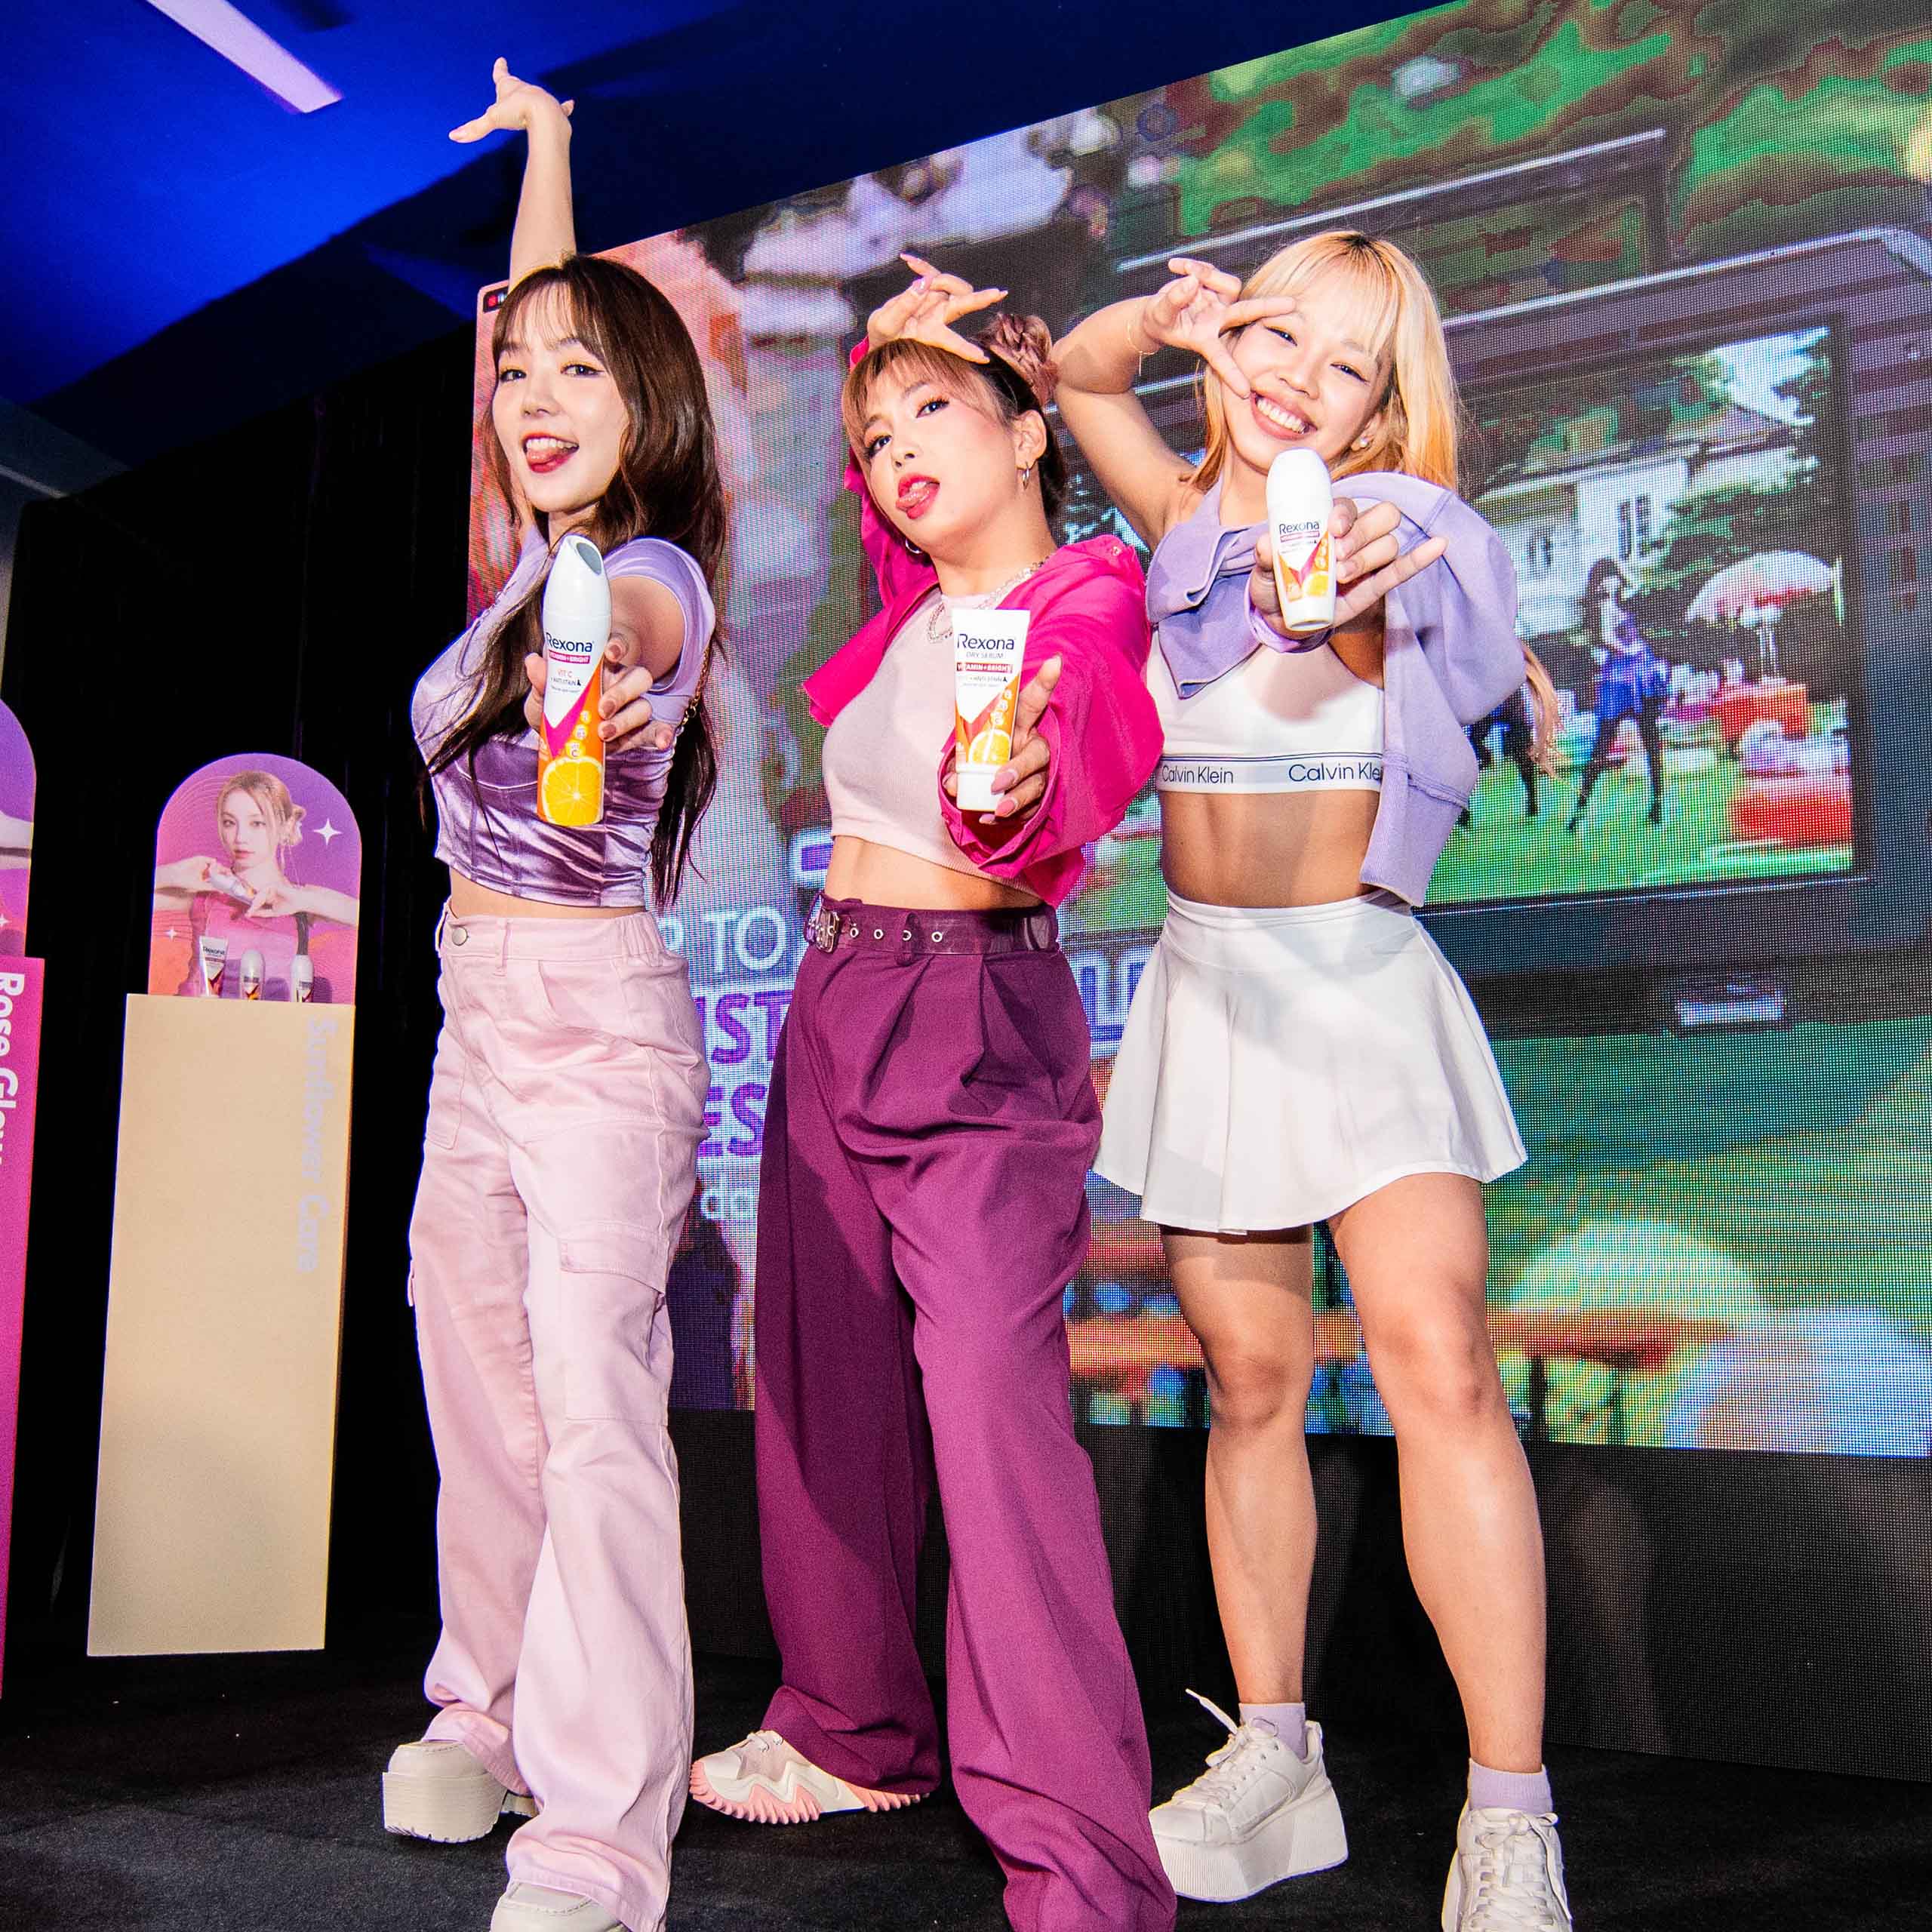 A Super Bright Afternoon with Rexona and (G)I-DLE